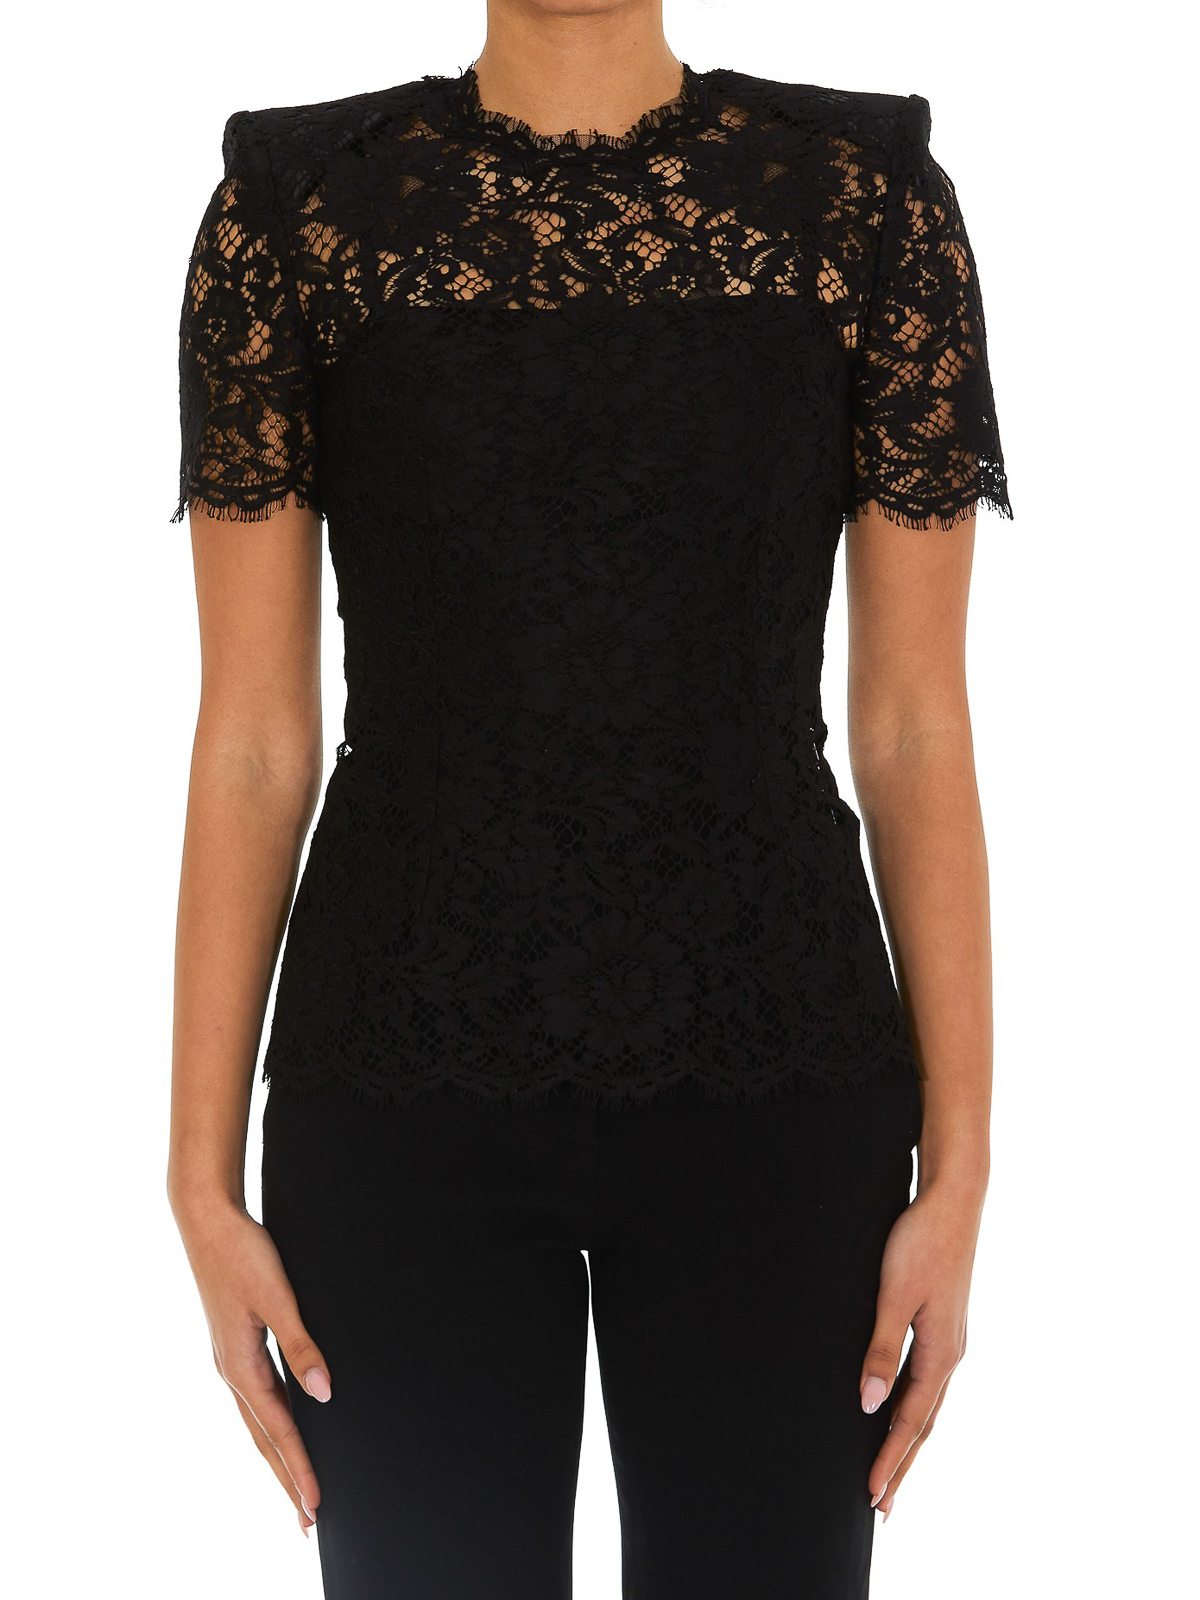 Arriba 62+ imagen dolce and gabbana black lace top - Abzlocal.mx